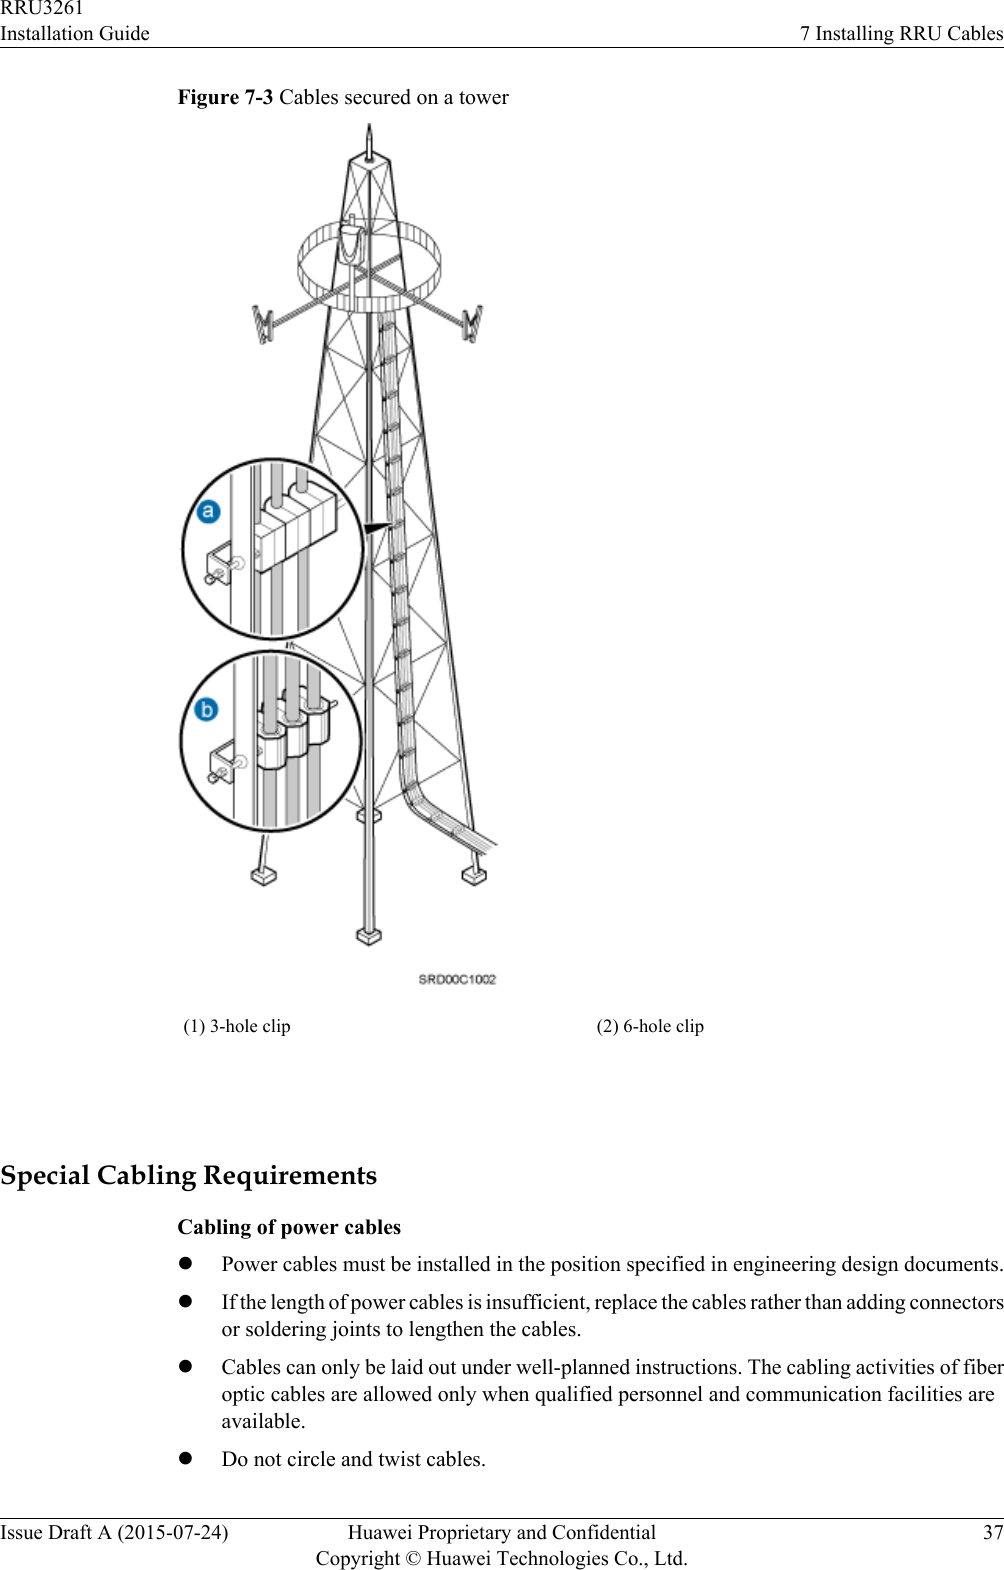 Figure 7-3 Cables secured on a tower(1) 3-hole clip (2) 6-hole clip Special Cabling RequirementsCabling of power cableslPower cables must be installed in the position specified in engineering design documents.lIf the length of power cables is insufficient, replace the cables rather than adding connectorsor soldering joints to lengthen the cables.lCables can only be laid out under well-planned instructions. The cabling activities of fiberoptic cables are allowed only when qualified personnel and communication facilities areavailable.lDo not circle and twist cables.RRU3261Installation Guide 7 Installing RRU CablesIssue Draft A (2015-07-24) Huawei Proprietary and ConfidentialCopyright © Huawei Technologies Co., Ltd.37